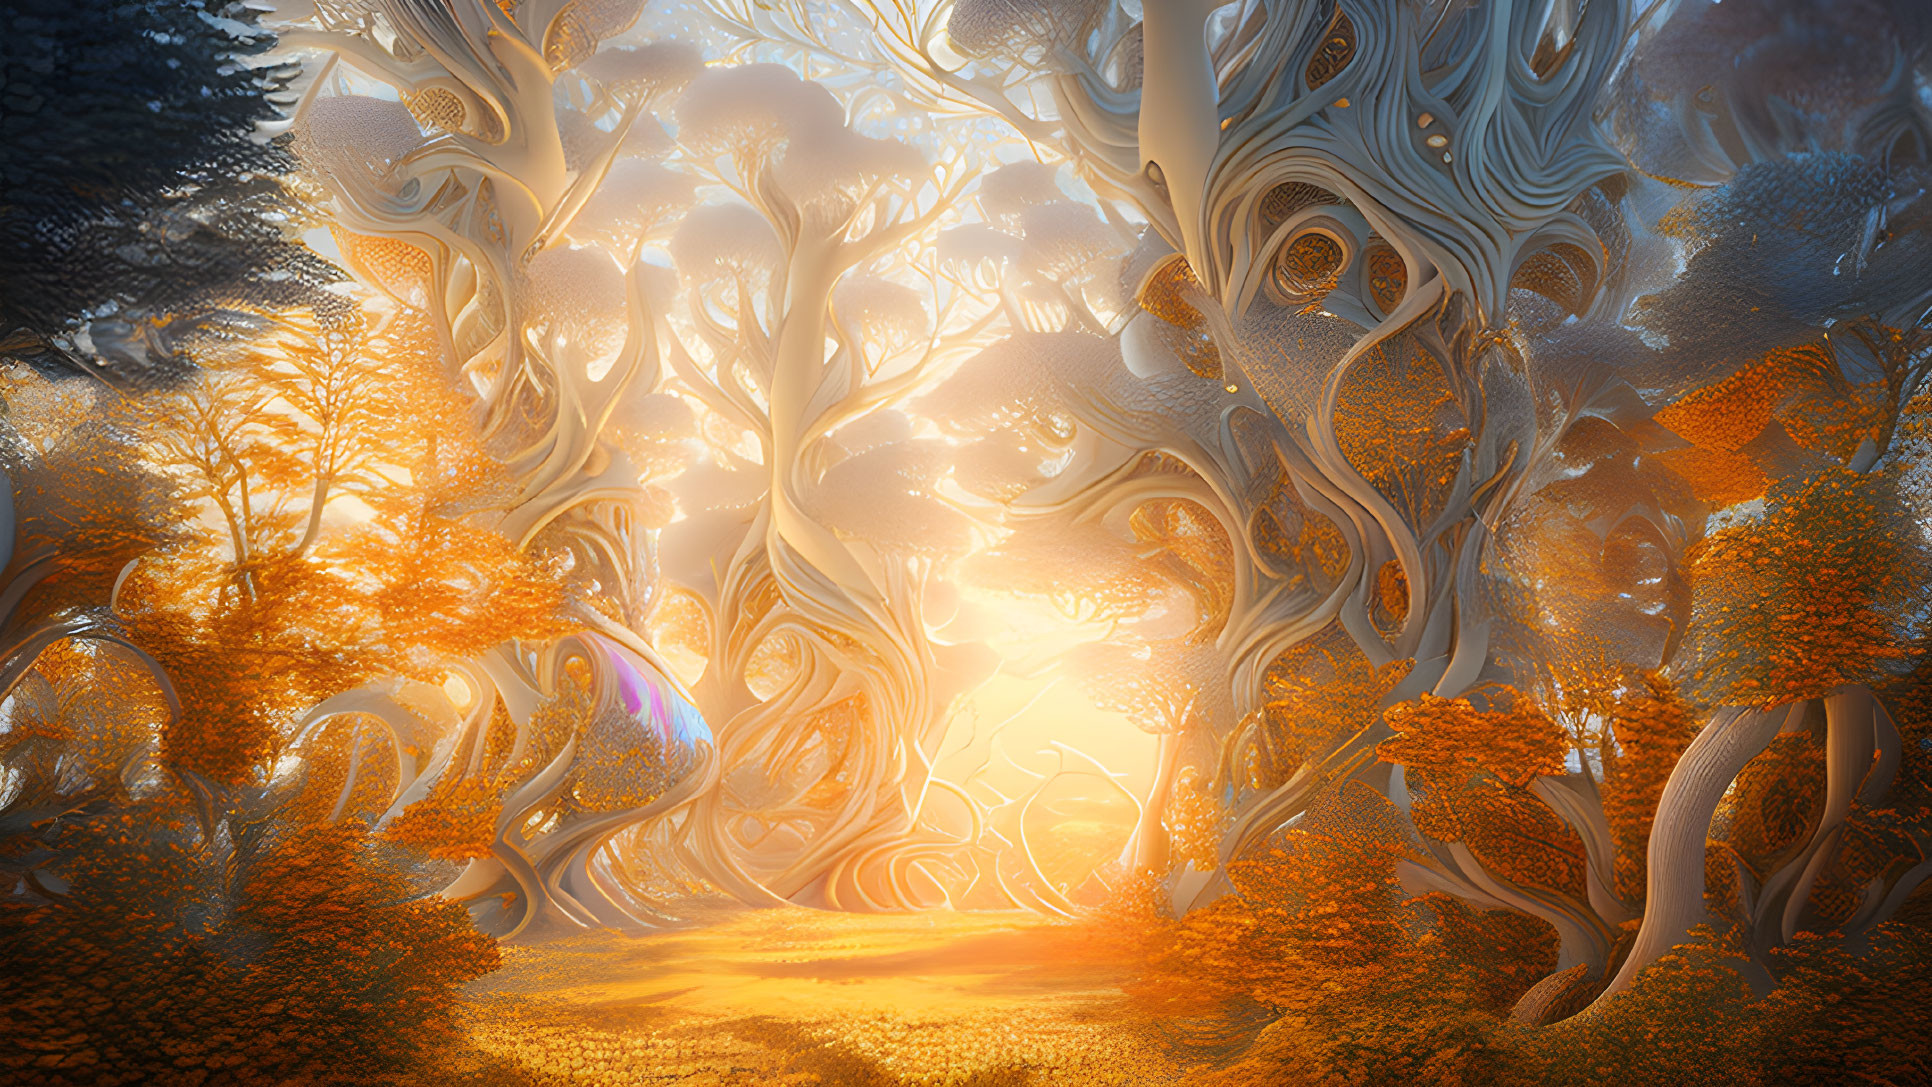 Surreal Enchanted Forest with Swirling Trees in Golden Sunlight